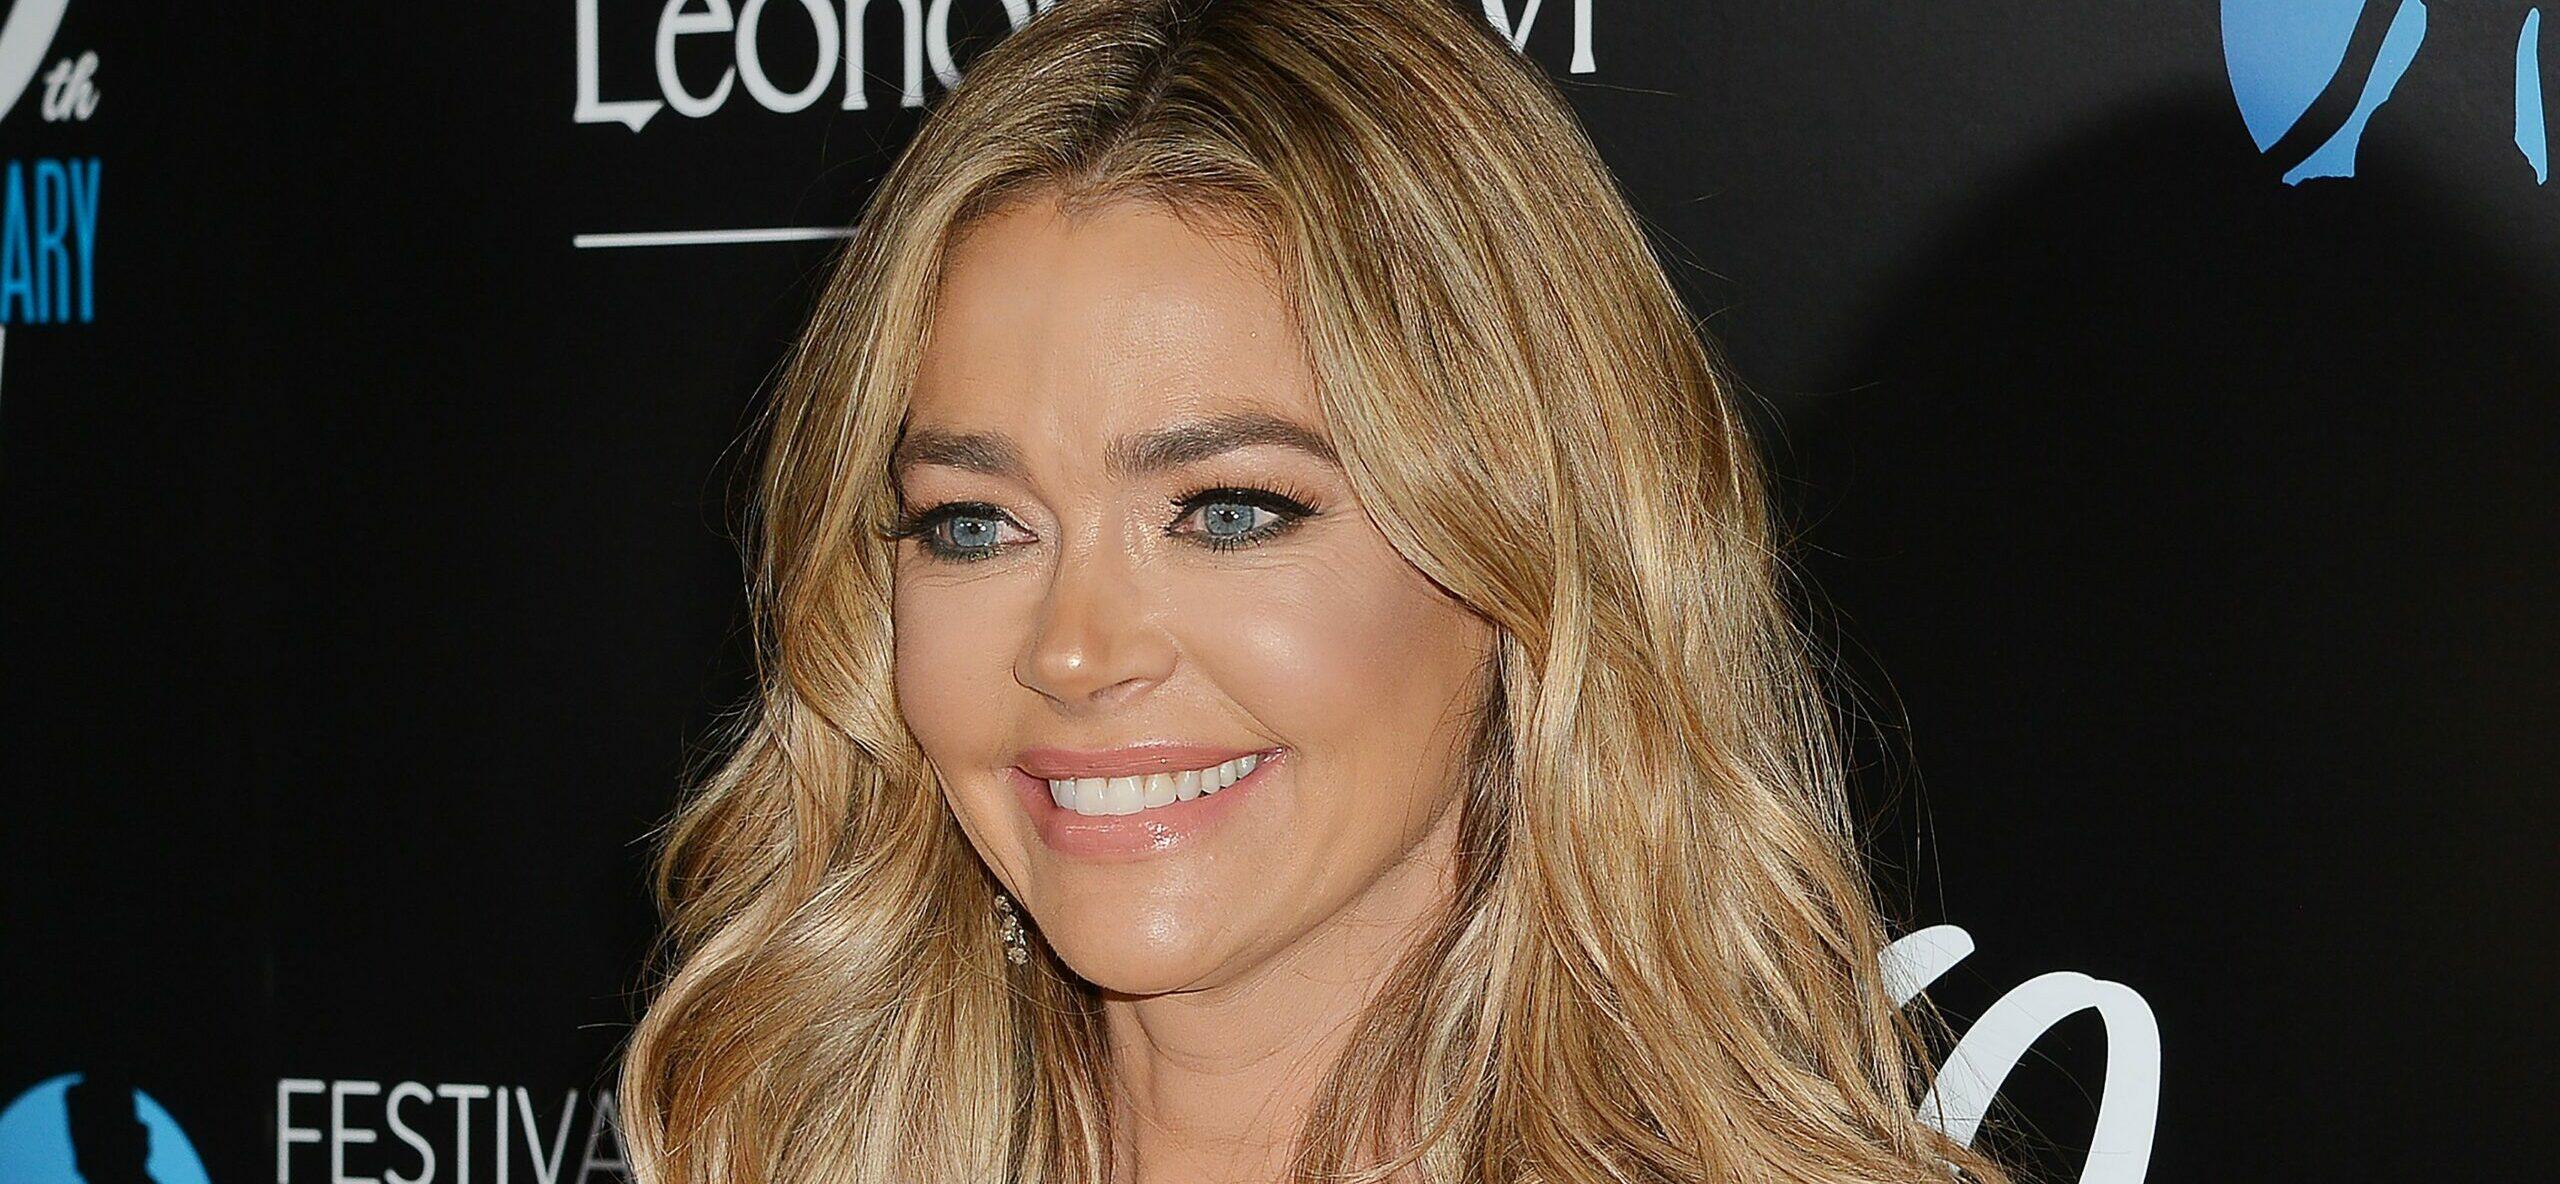 Denise Richards at the 60th Anniversary Party of the Monte-Carlo Television Festival